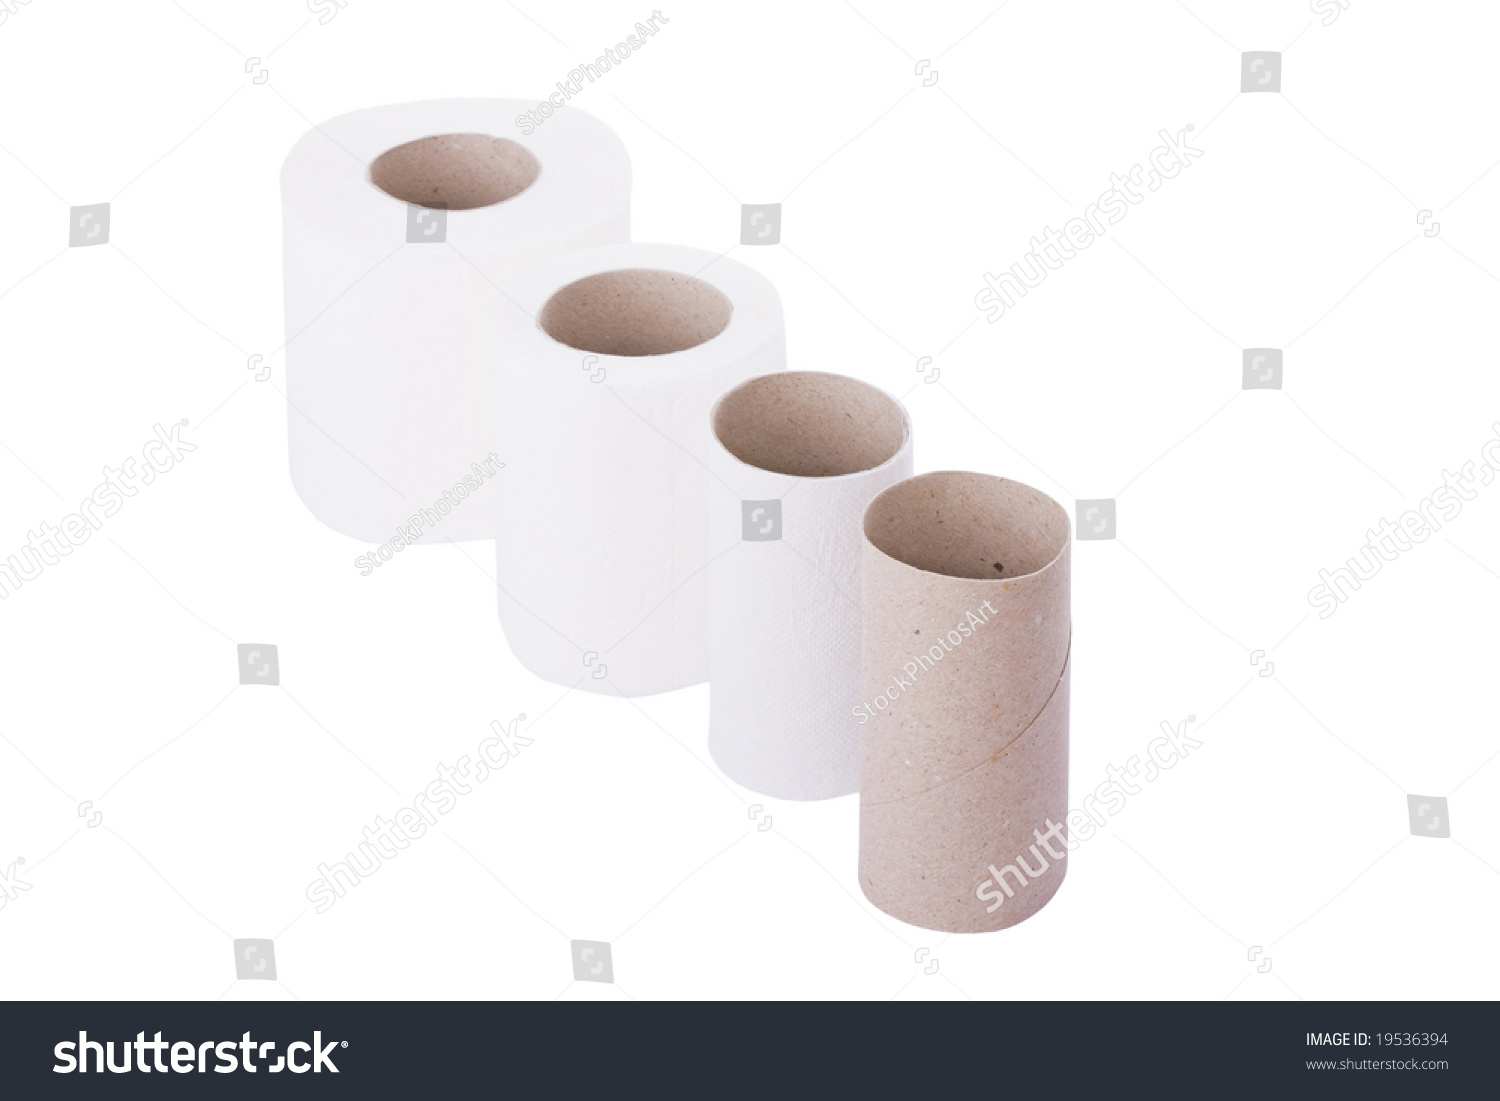 Sequence Of Toilet Paper Rolls From New To Empty Stock Photo 19536394 ...